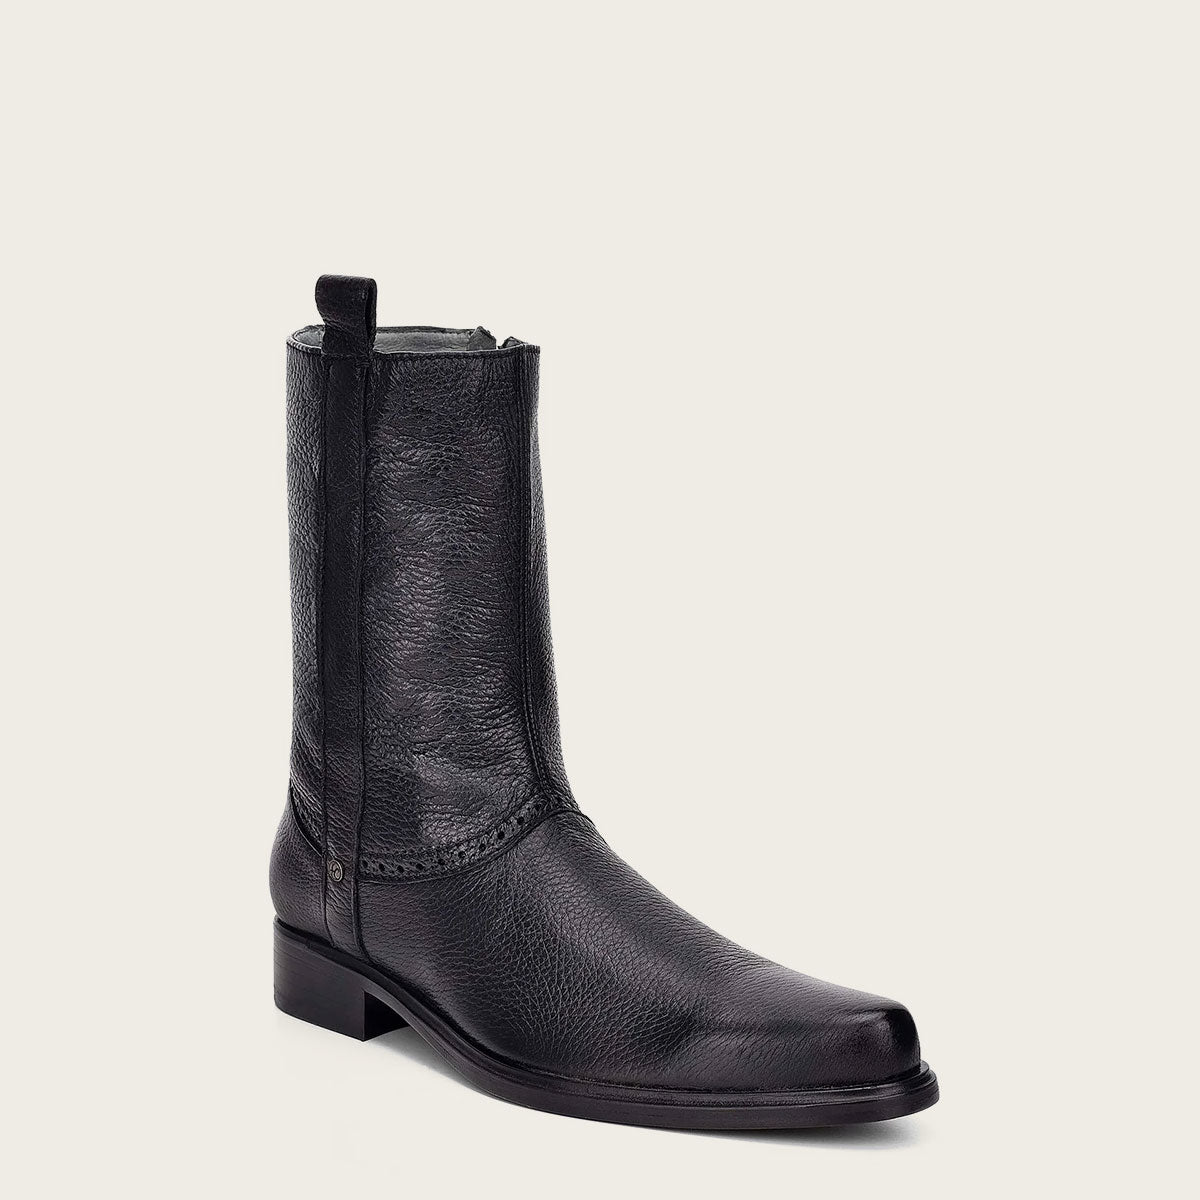 Black leather boot with intricate hand-painted details, including floral and geometric patterns